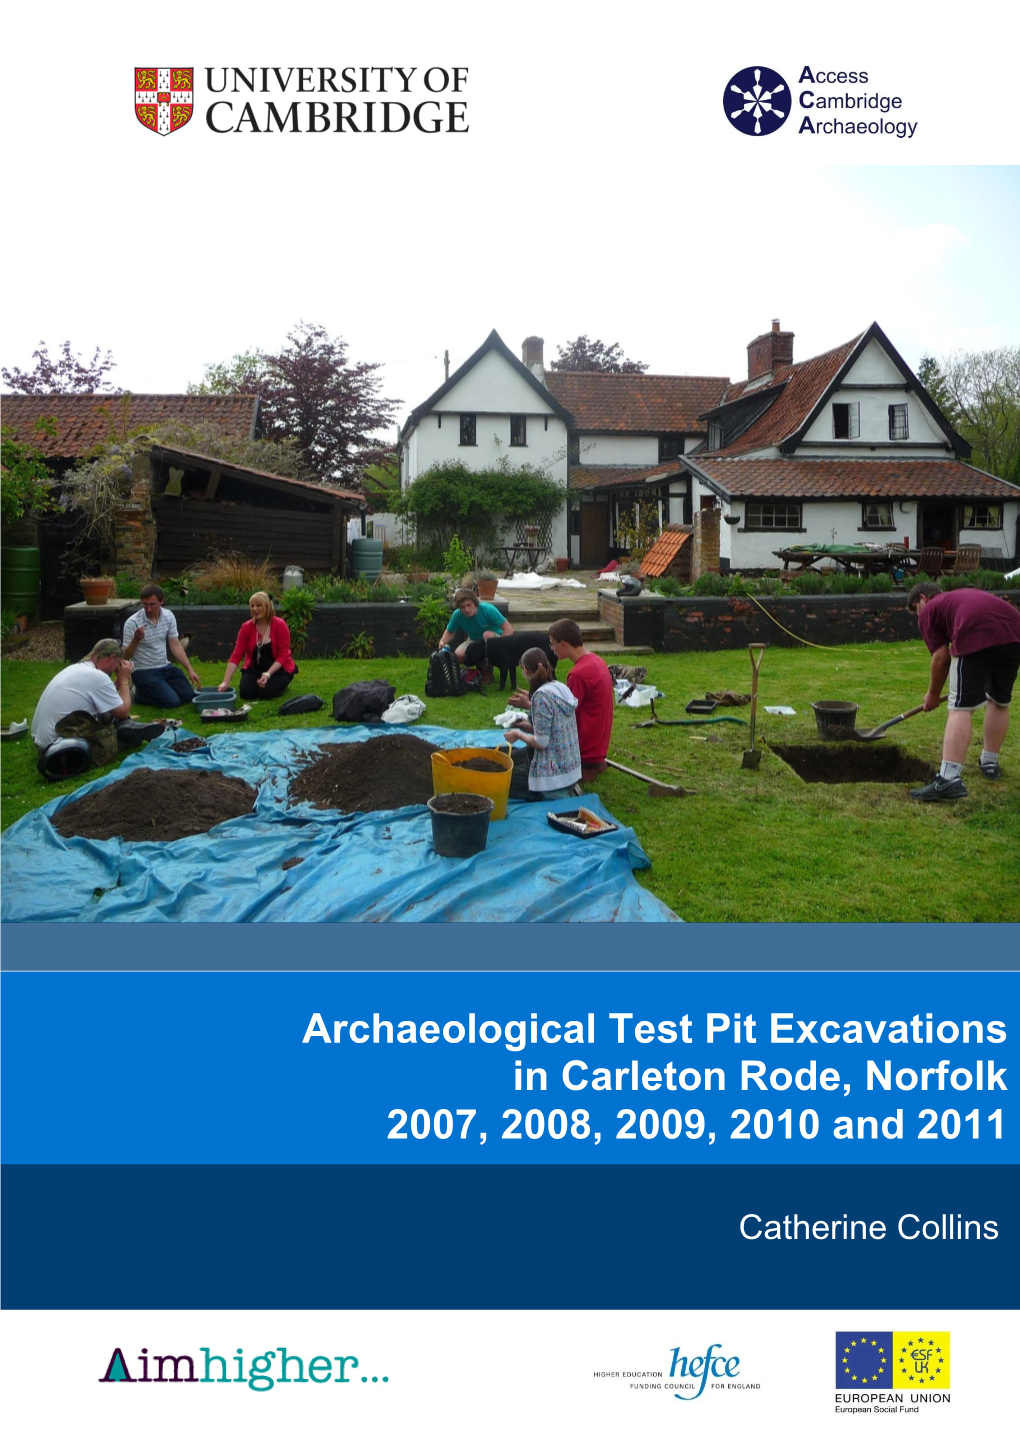 Archaeological Test Pit Excavations in Carleton Rode, Norfolk 2007, 2008, 2009, 2010 and 2011